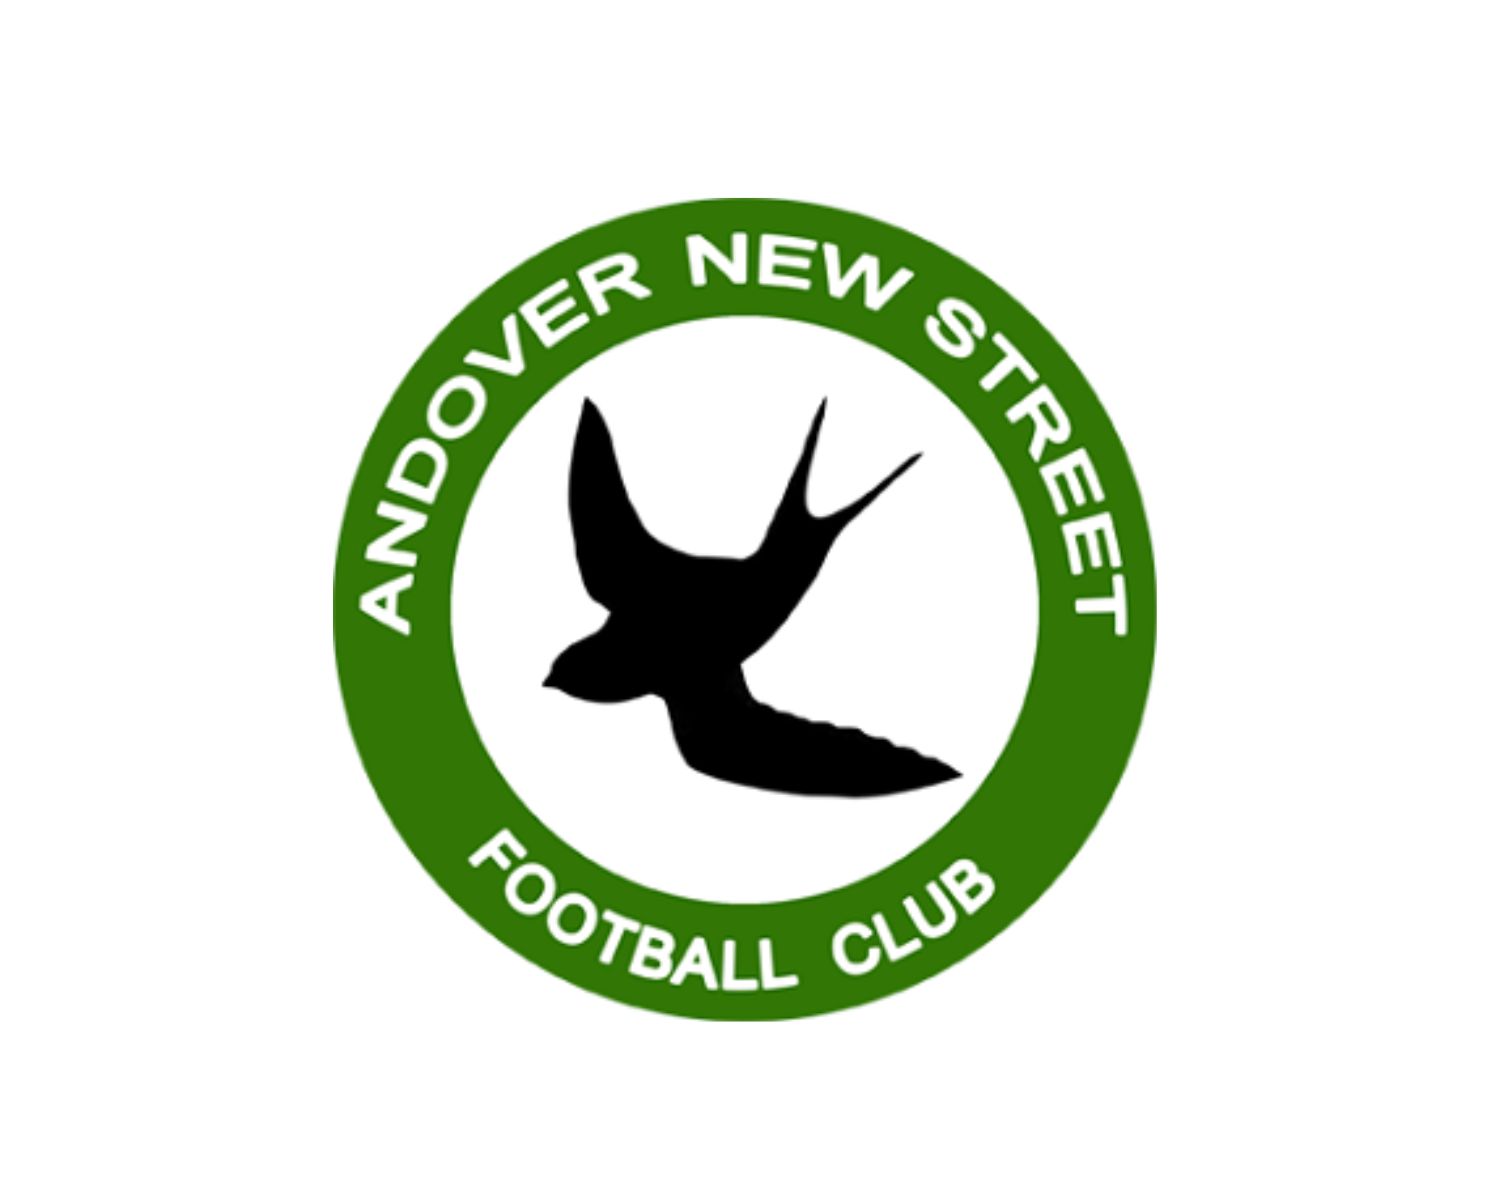 andover-new-street-fc-15-football-club-facts